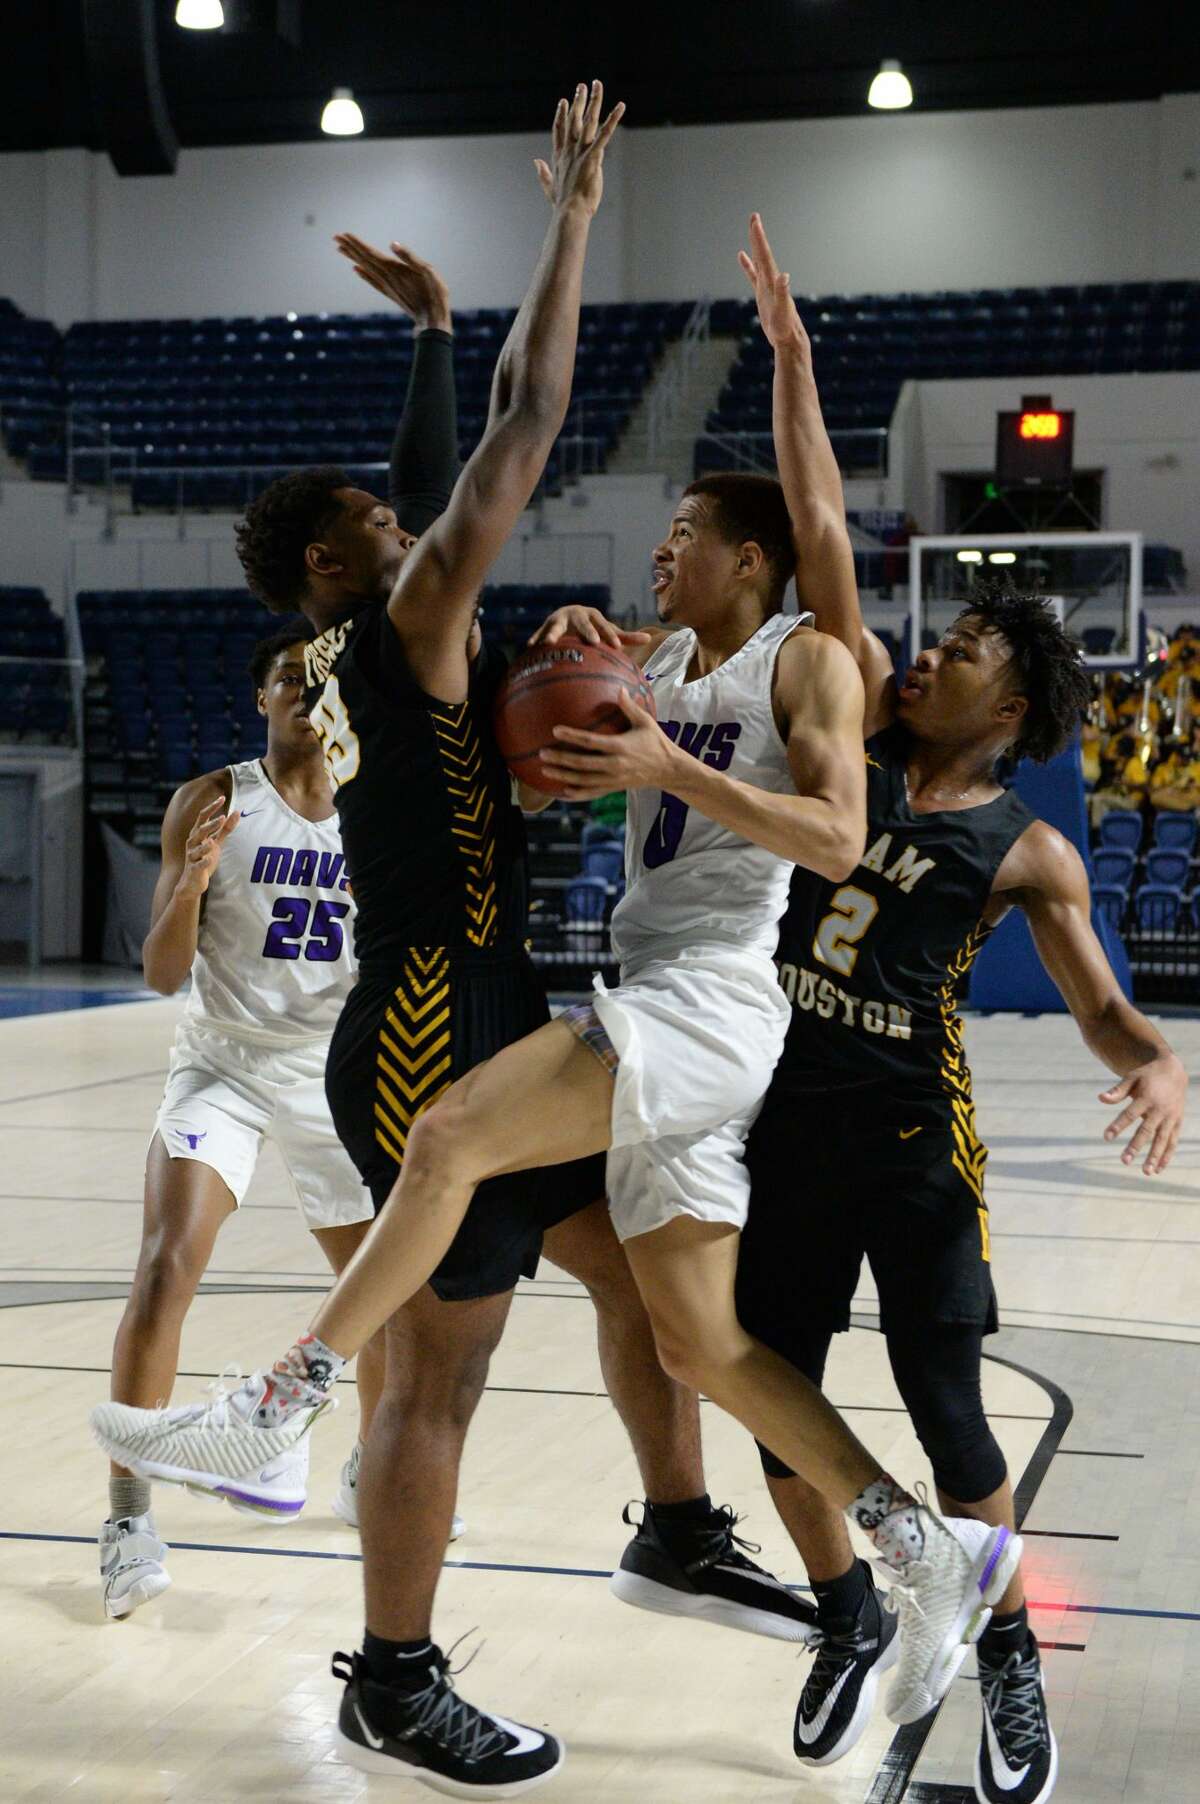 Westley Sellers (0) of Morton Ranch drives to the basket between a pair of Tiger defenders during the fourth quarter of the Boys 6A Region III Area play-off game between the Morton Ranch Mavericks and the Sam Houston Tigers on Thursday, February 27, 2020 at Delmar Fieldhouse, Houston, TX.